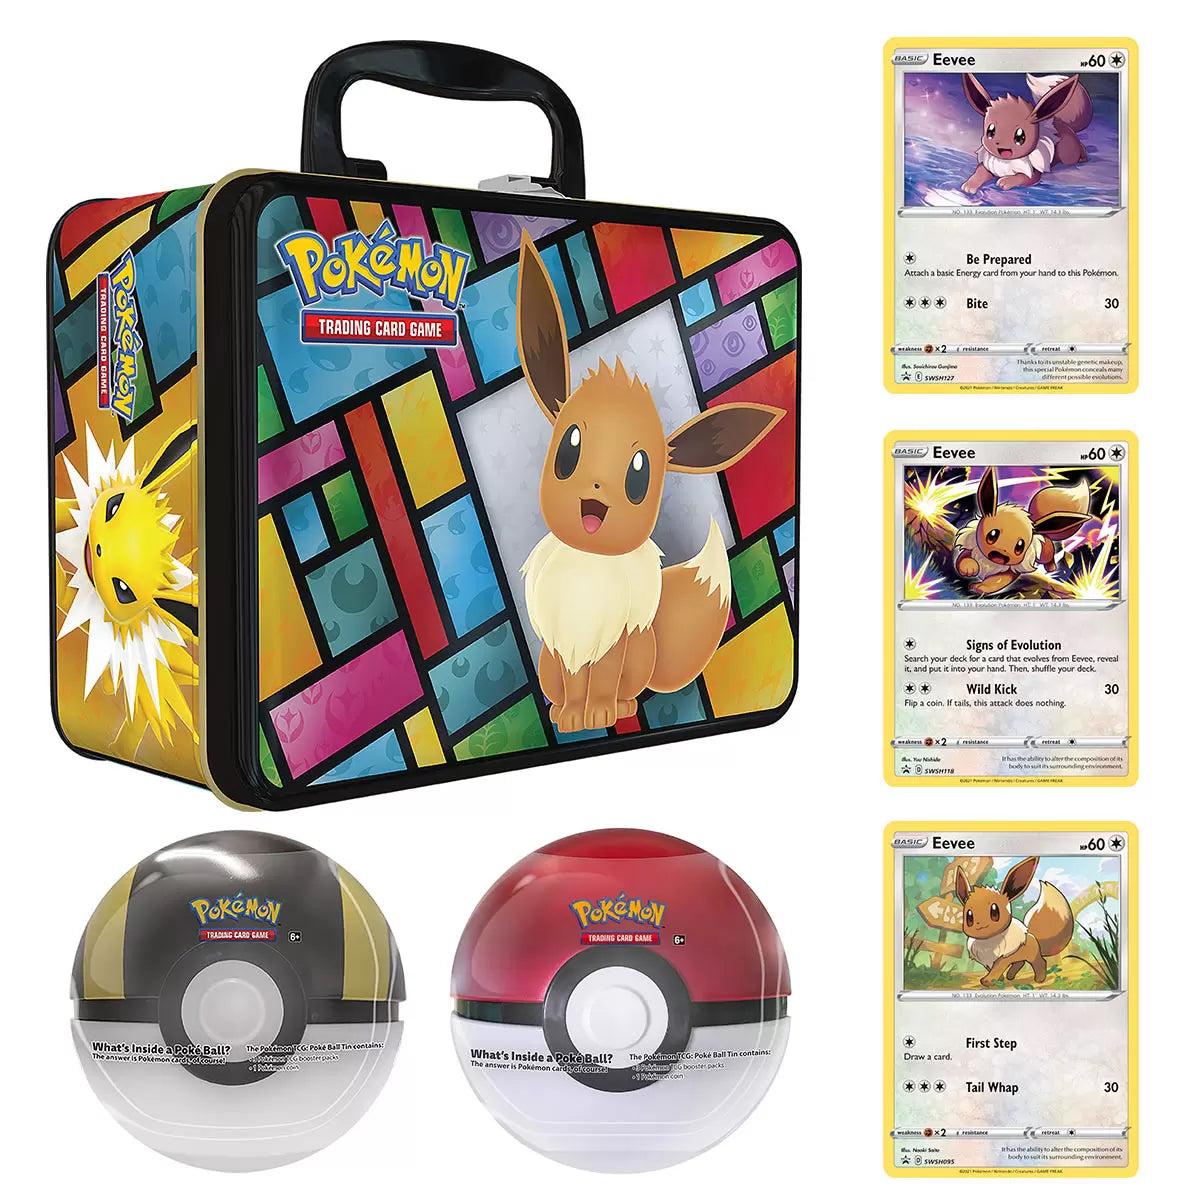 Pokémon Collectors Chest with 2 Poke Balls & 3 Eevee Promo Cards